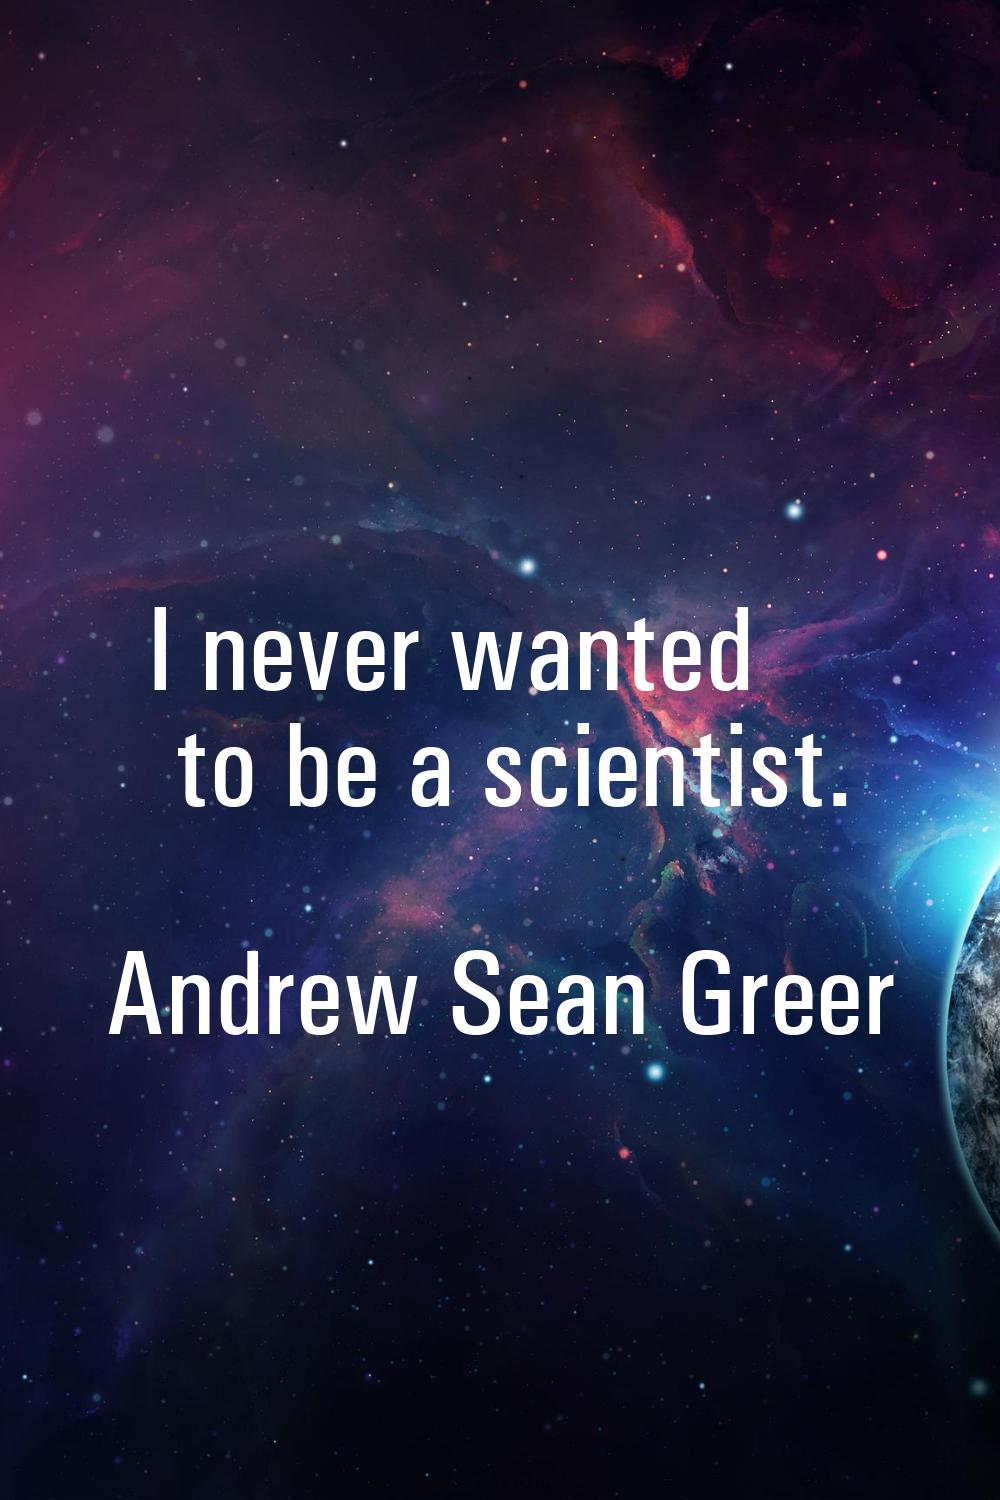 I never wanted to be a scientist.